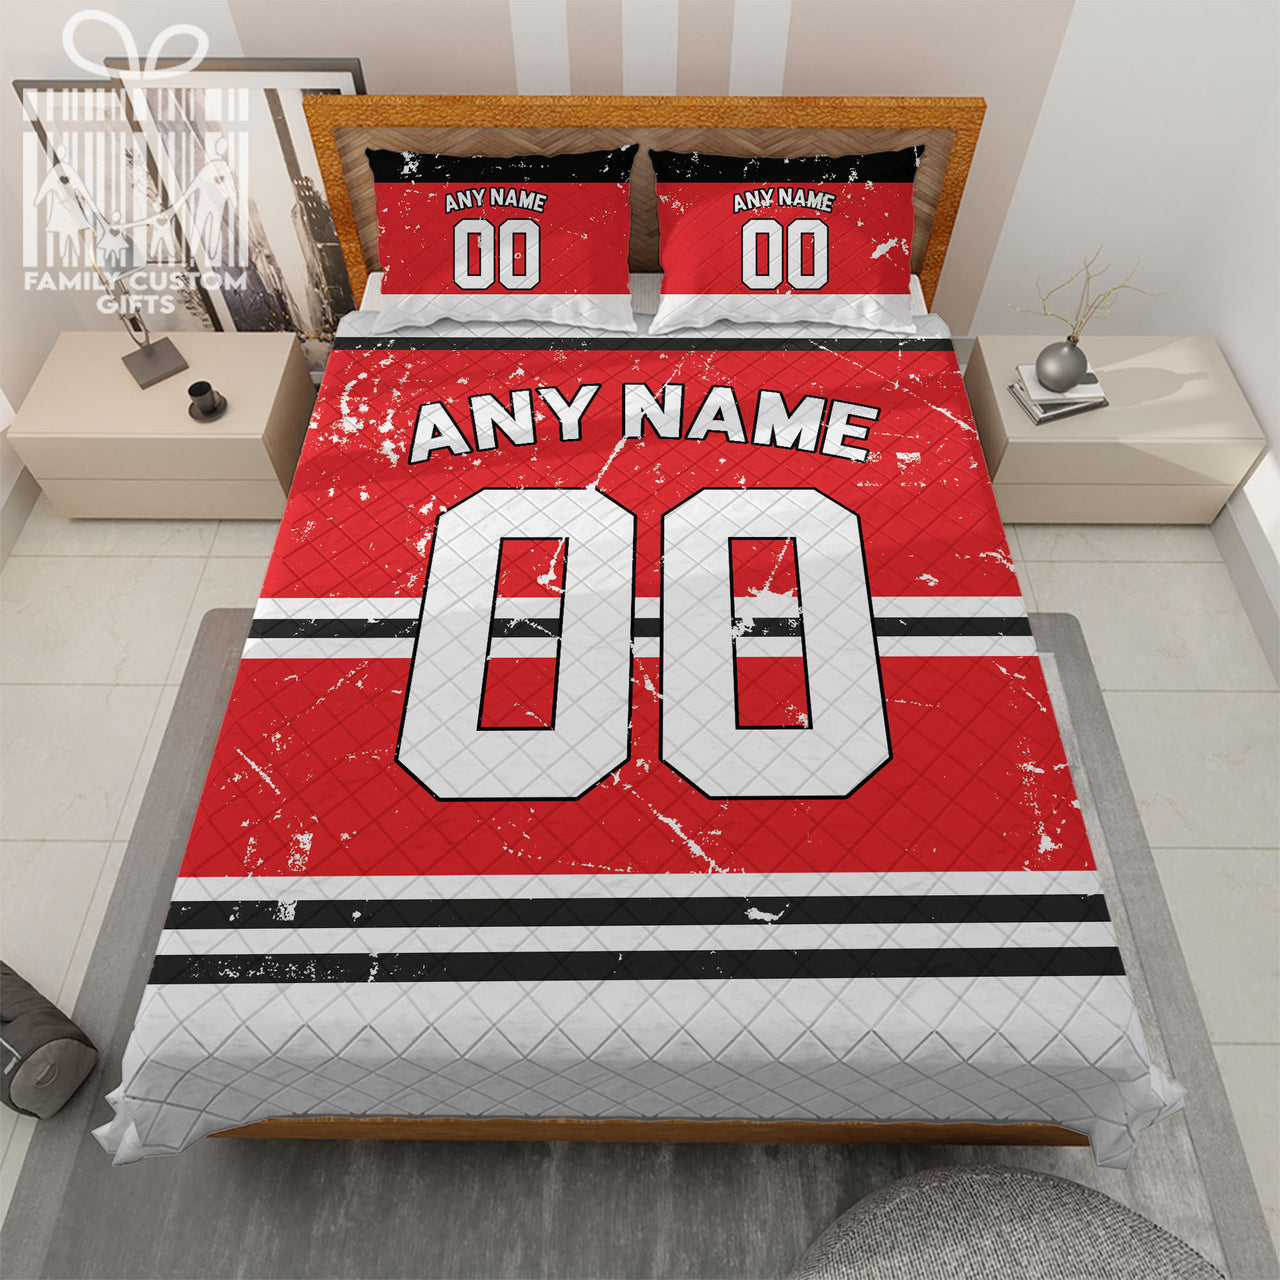 Custom Quilt Sets Chicago Jersey Personalized Ice hockey Premium Quilt Bedding for Men Women